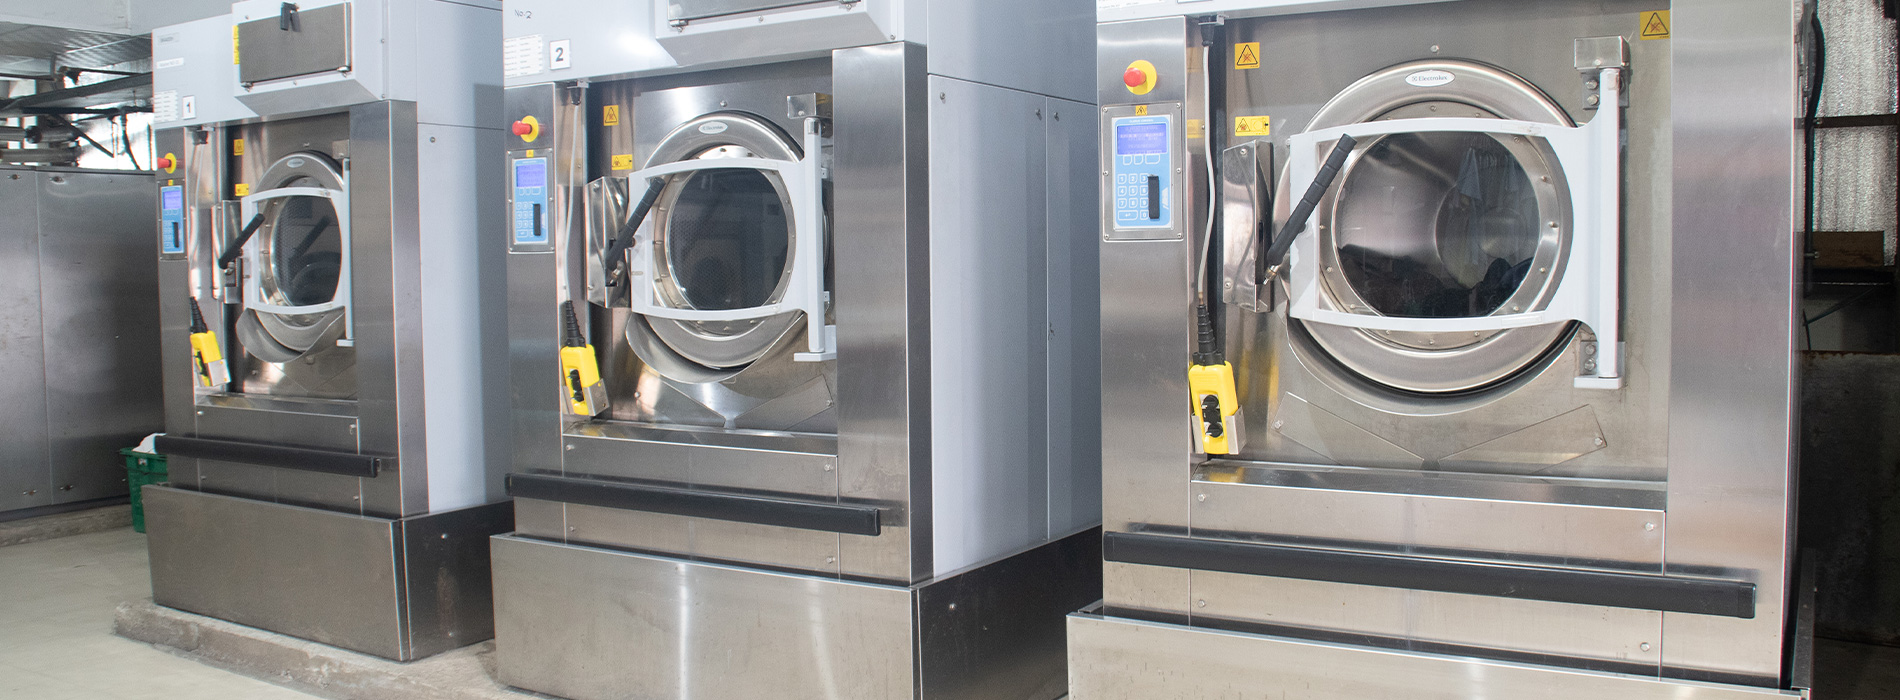 Jet Wash | Laundry Service | Washing, Pressing, Dry Cleaning